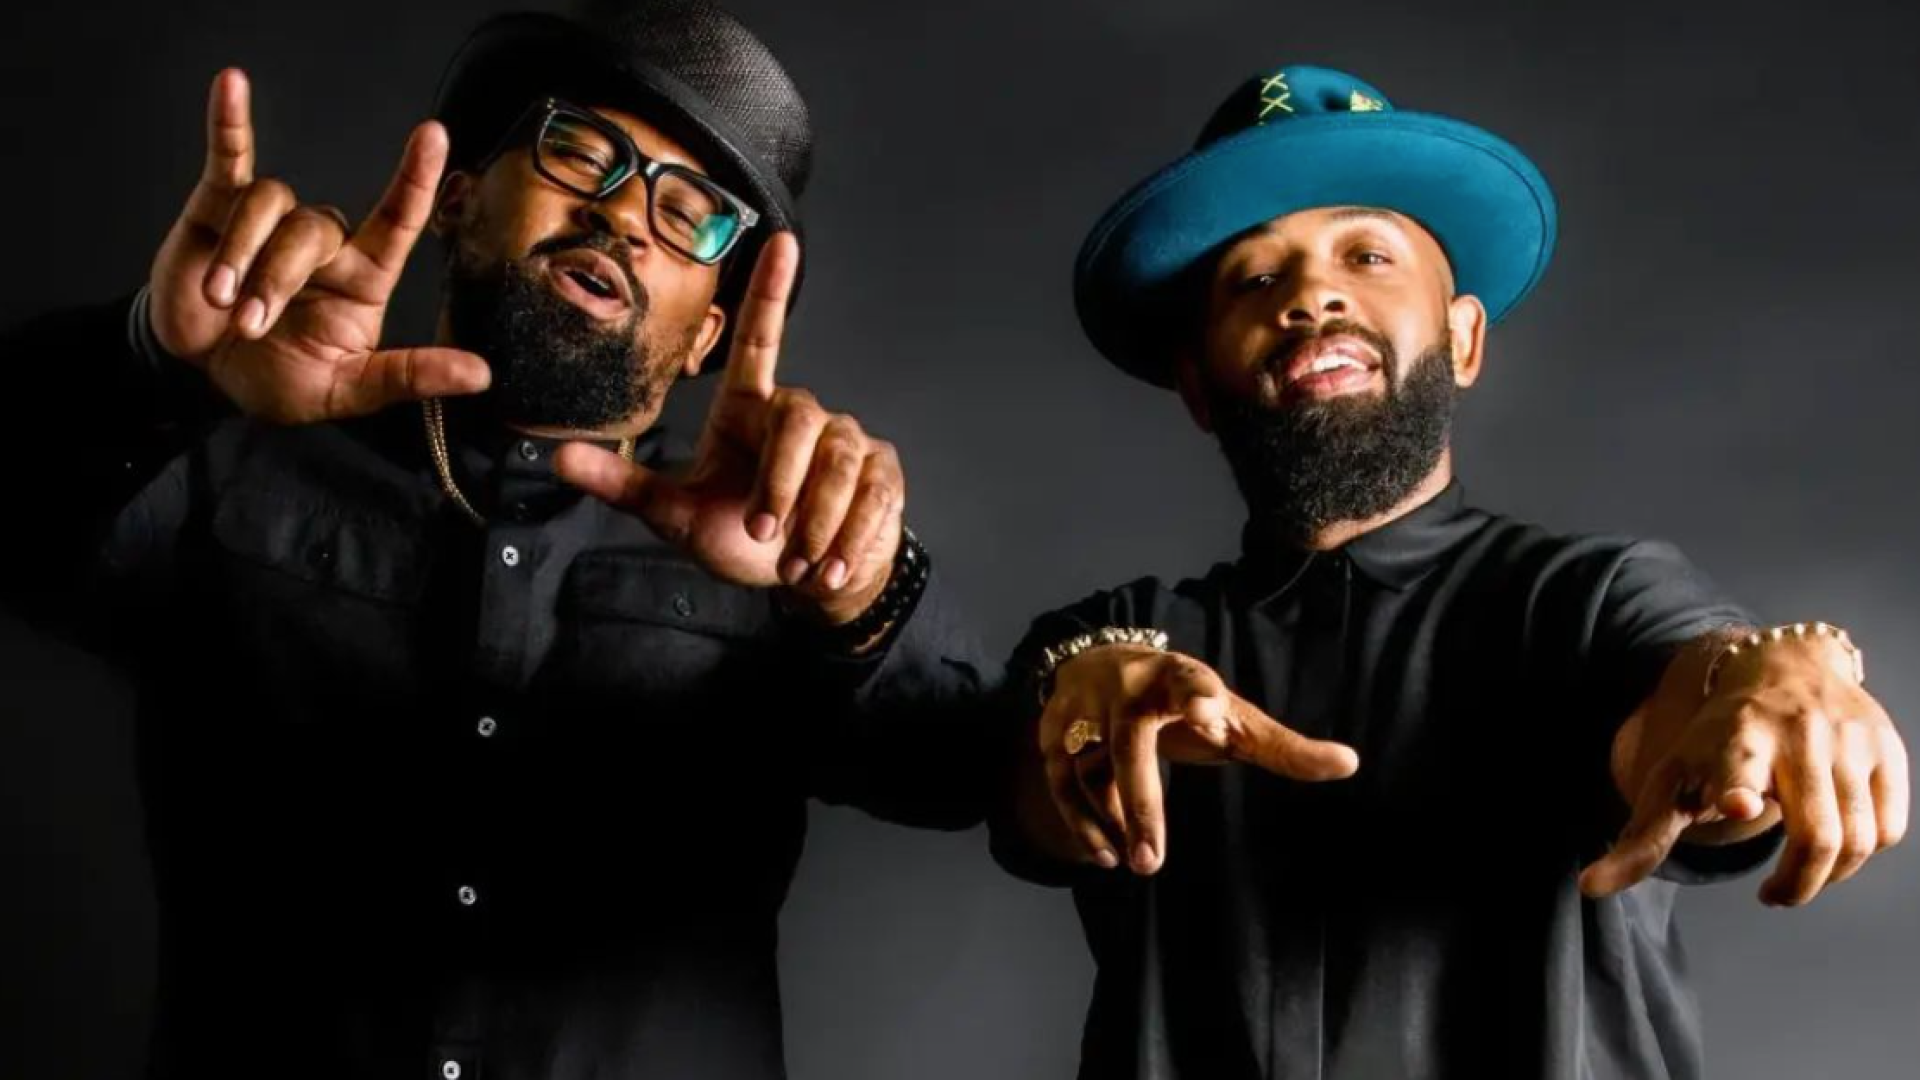 How Atlanta-Based Hat Designers Bryan Chatman And Stanzel Jackson’s Ideas Came To Fruition